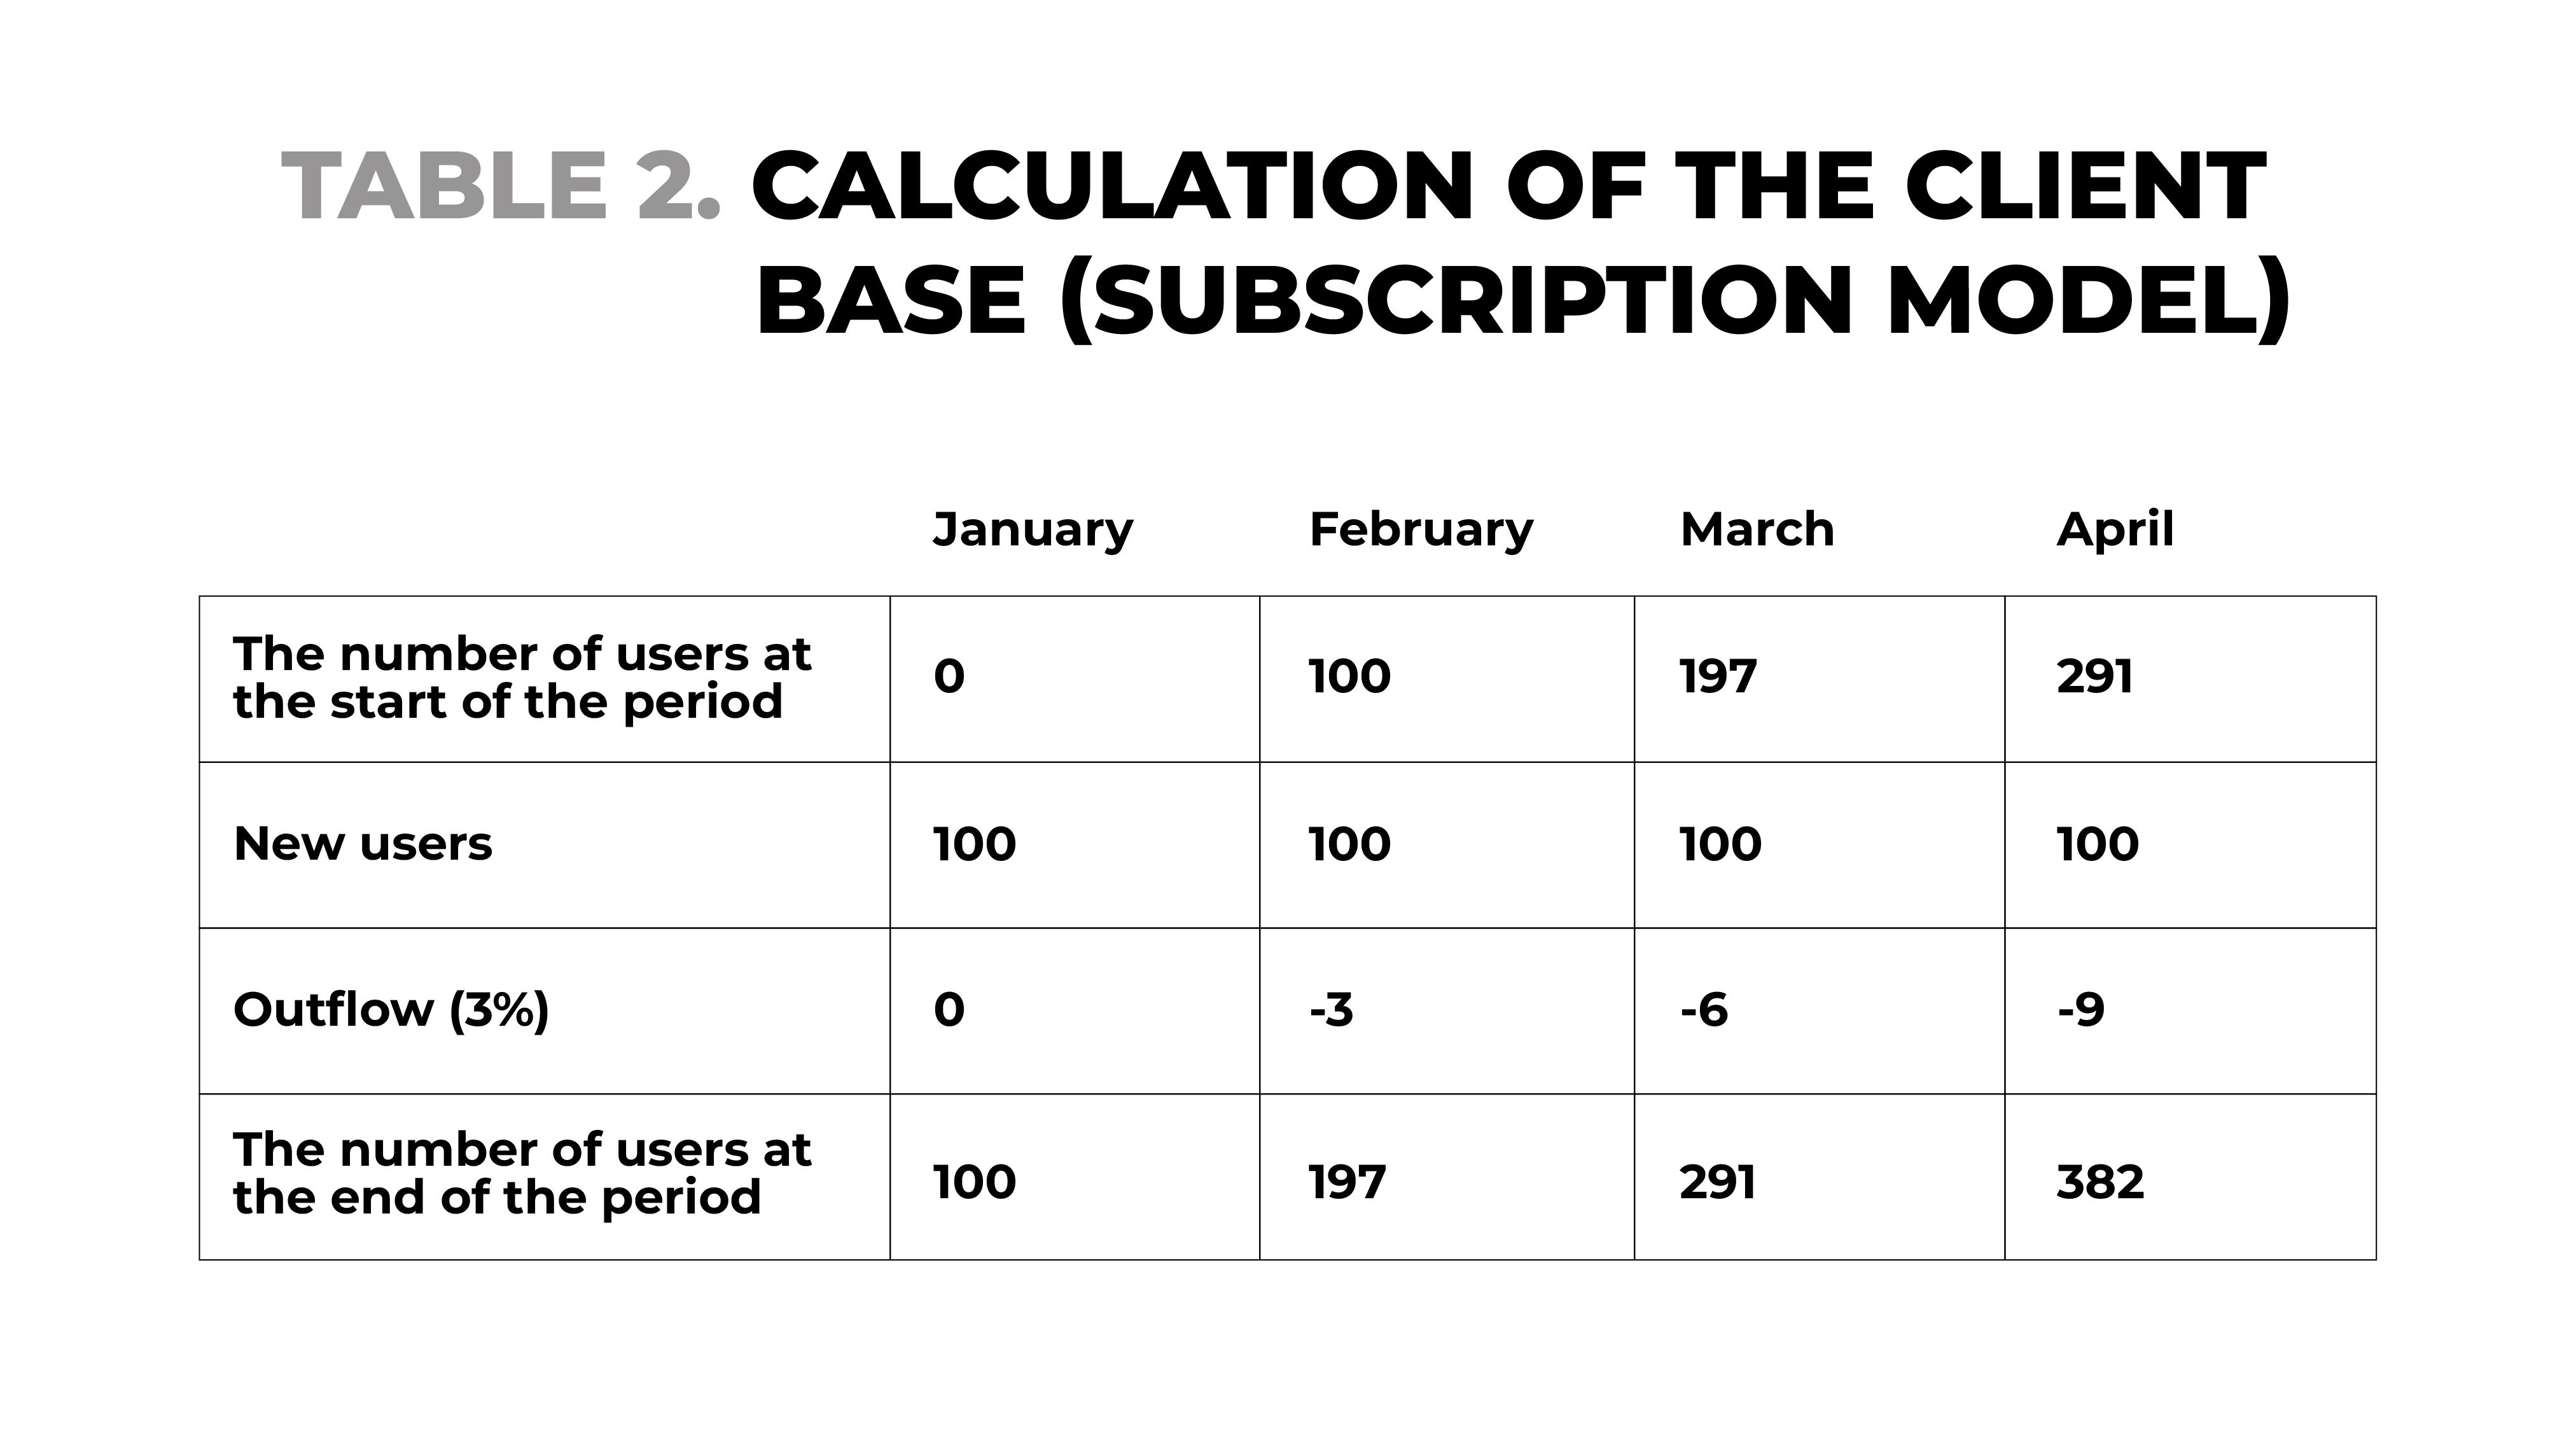 Table 2. Calculation of the client base (subscription model)